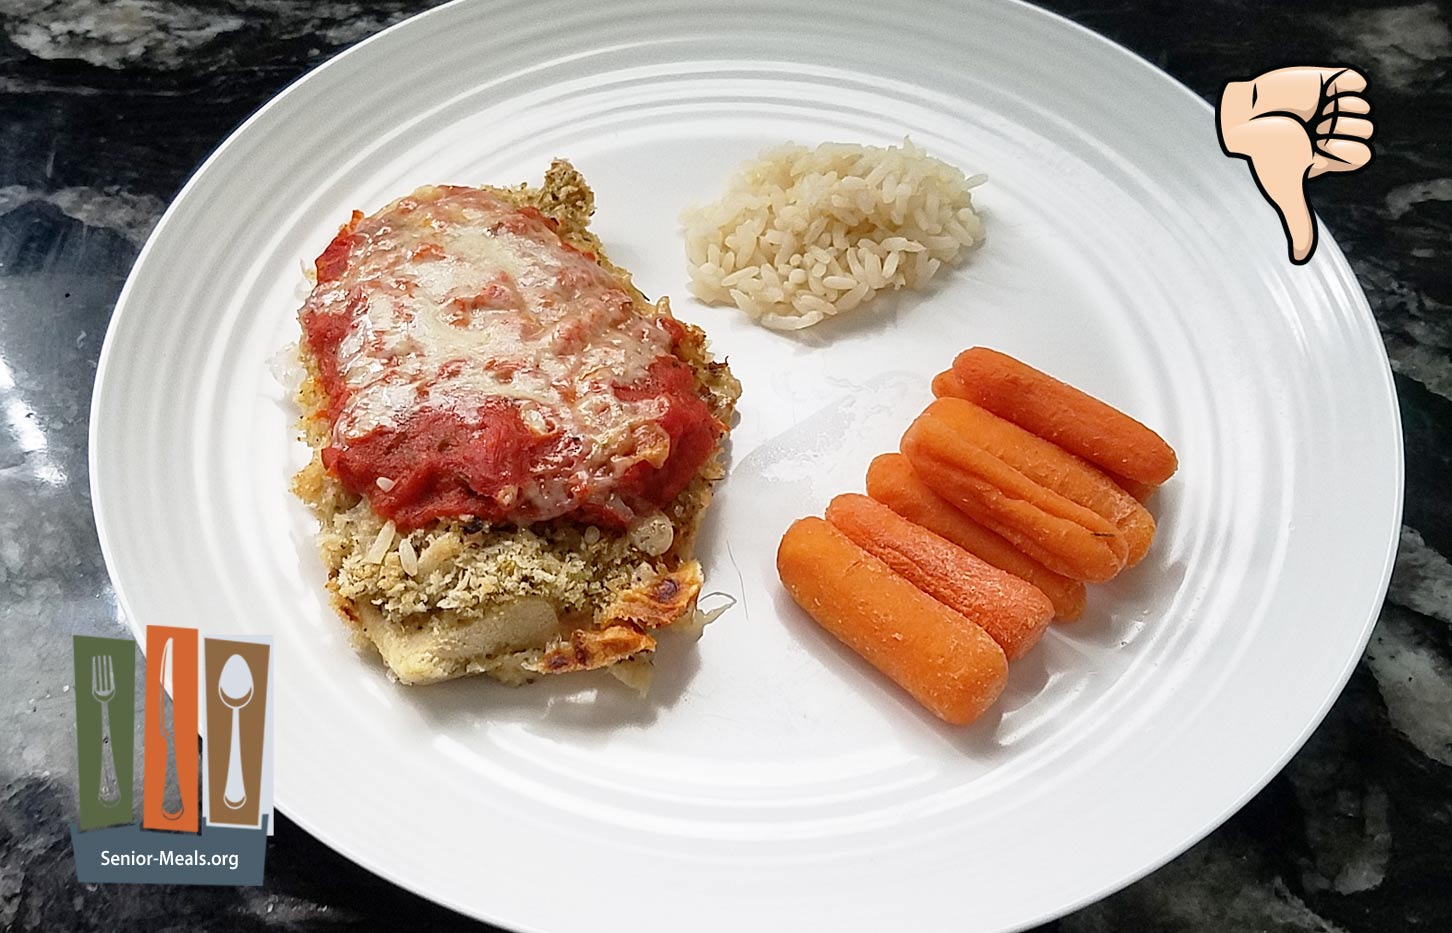 MK Signature Meal - Chicken Parmigiana, White Rice and Carrots - $12